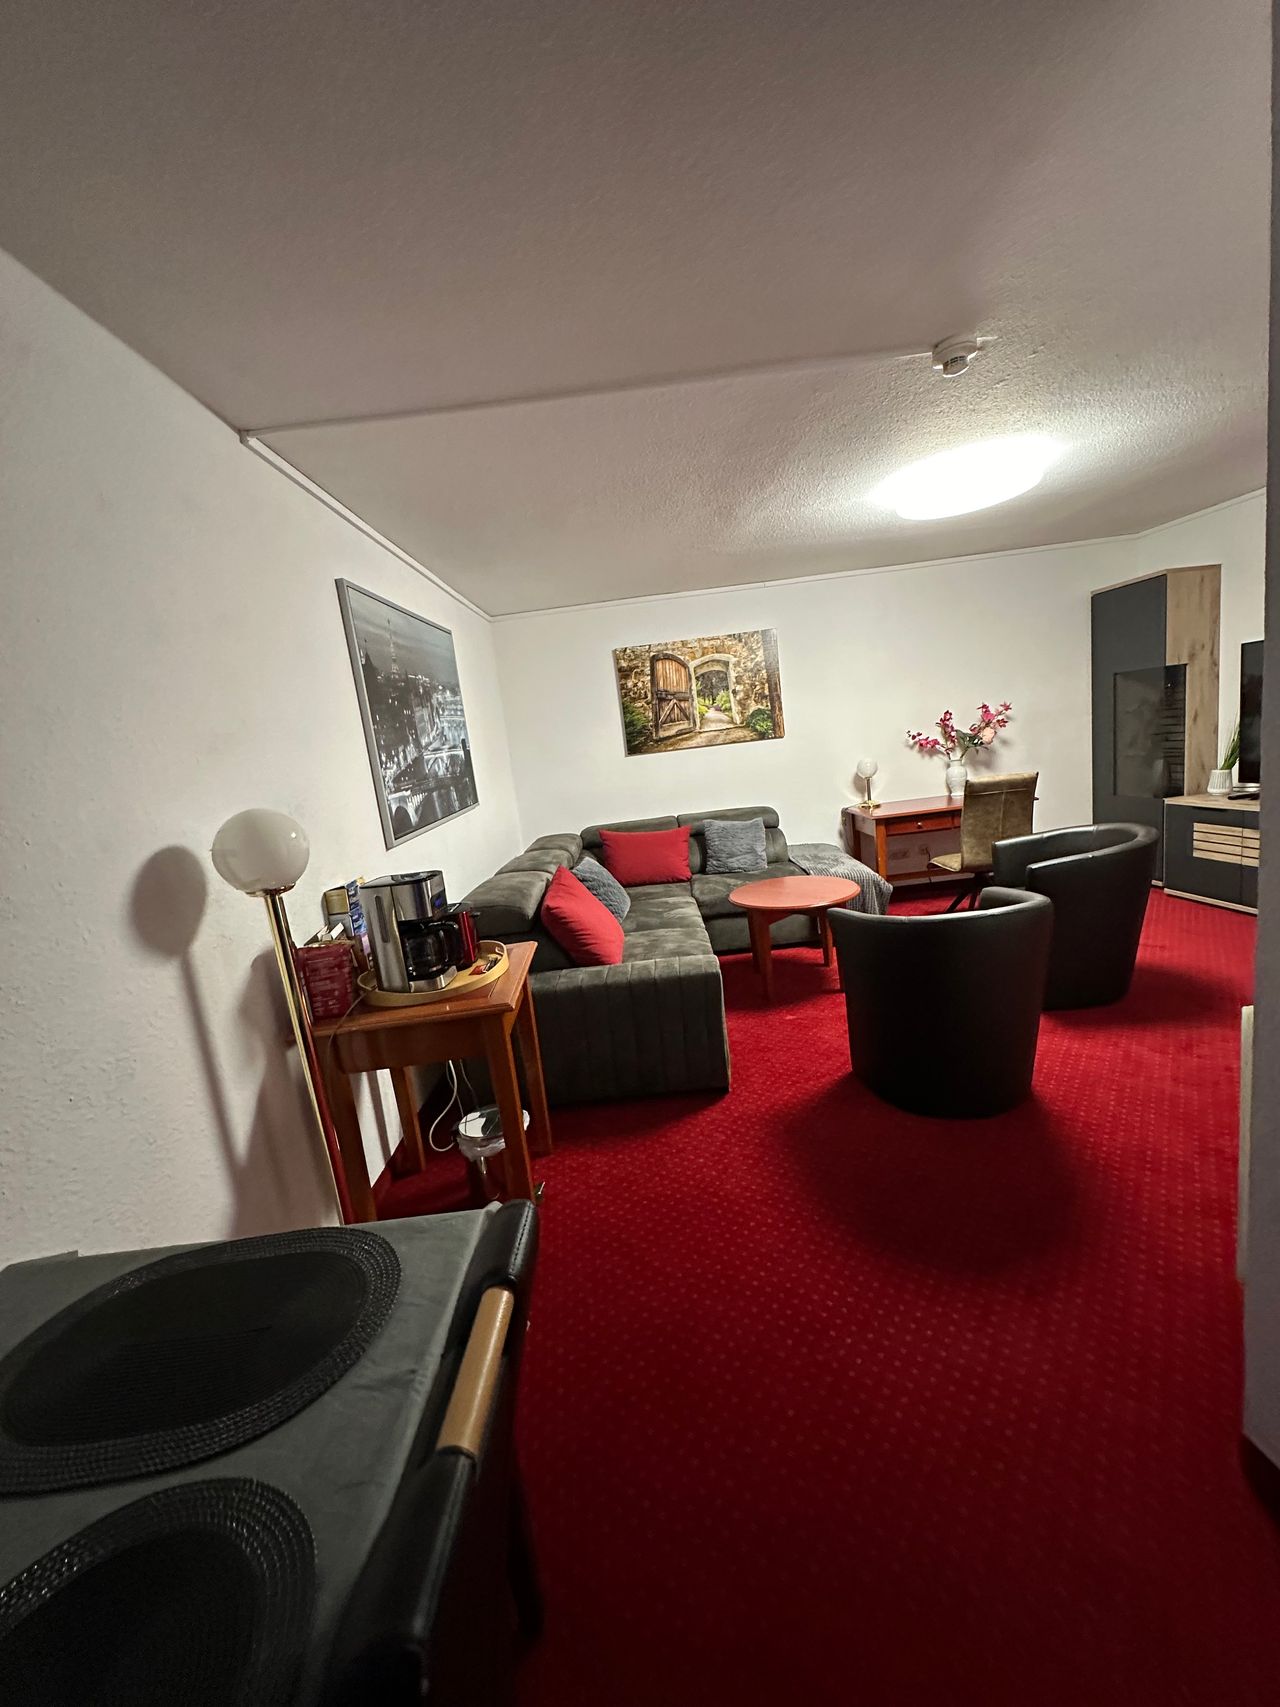 All-inclusive in Nuremberg: Fully furnished apartment in a central location